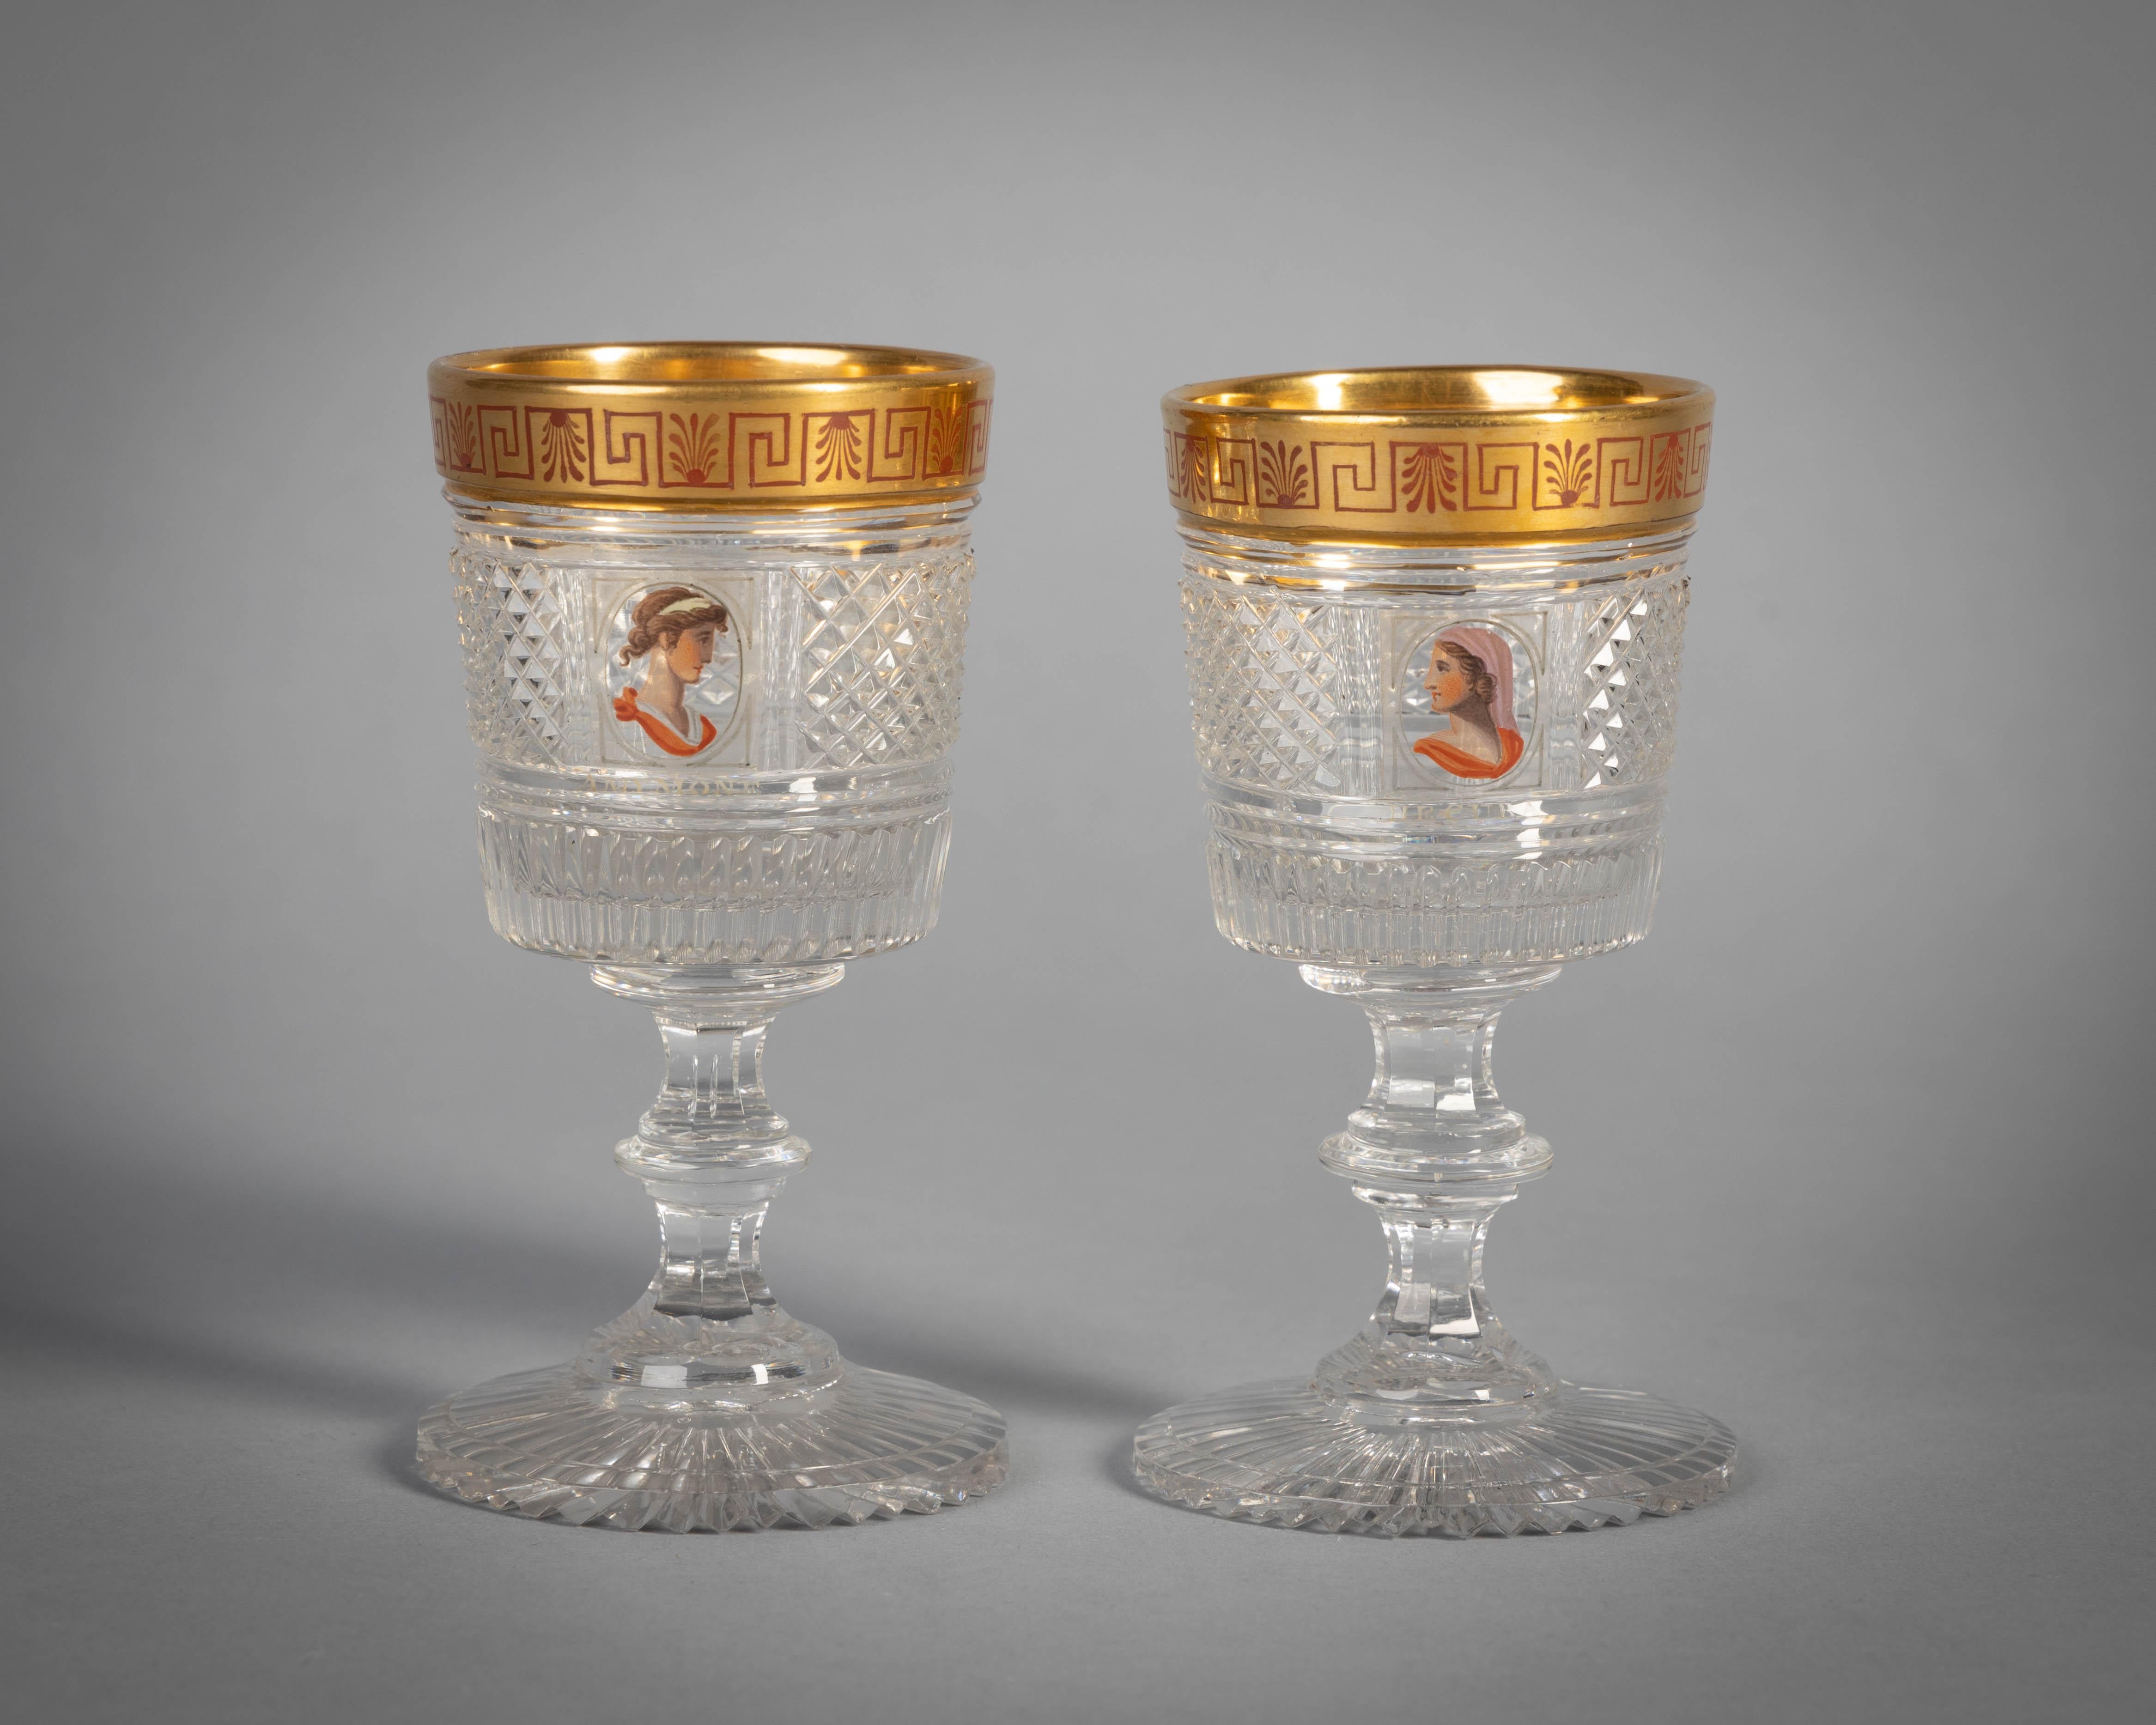 Extensive English Faceted and Enameled and Gilt Glass Service, circa 1815 For Sale 4